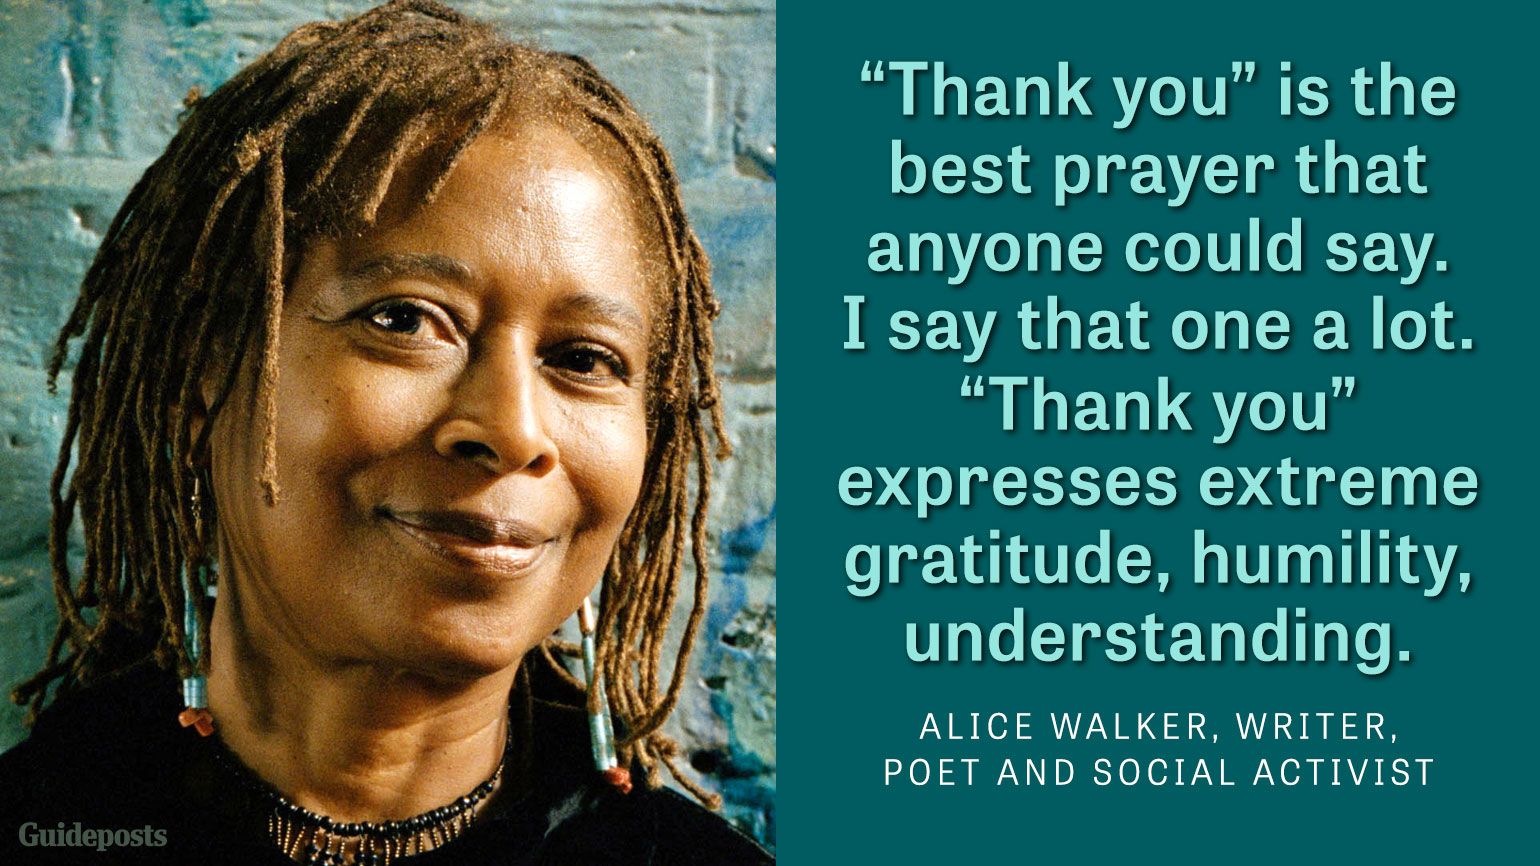 "Thank you" is the best prayer anyone could say. I say that one a lot. "Thank you" expresses extreme gratitude, humility, understanding.